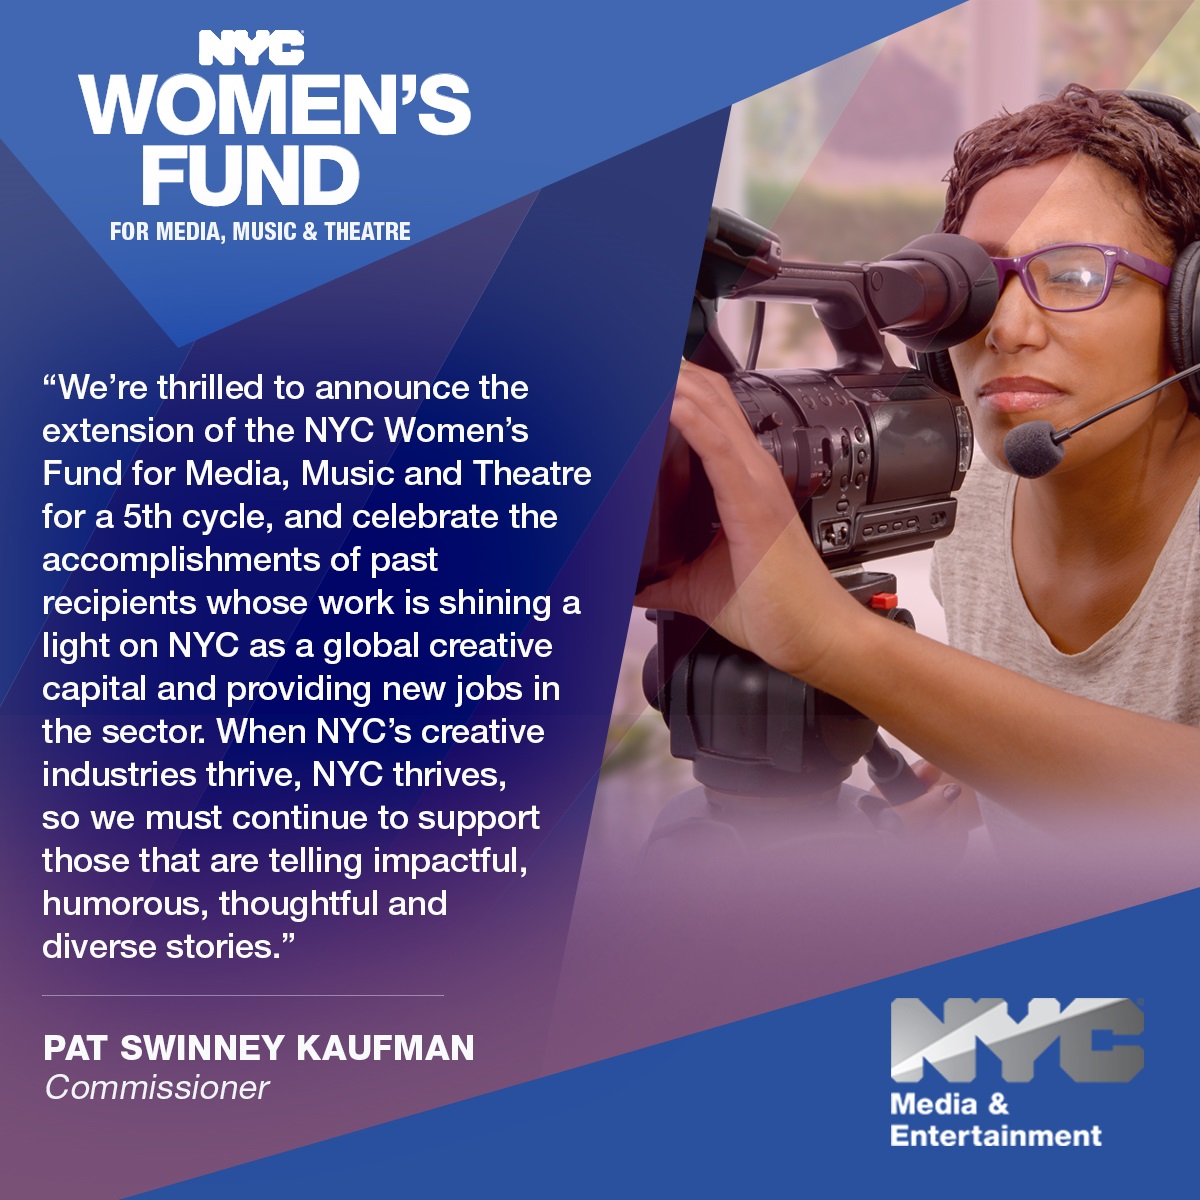 We're thrilled to announce the extension of #NYCWomensFund for a 5th cycle, and celebrate accomplishments of past recipients whose work's shining a light on NYC as a global creative capital & providing new jobs in the sector. NYC creatives, apply today: nyfa.org/nycwomensfund.